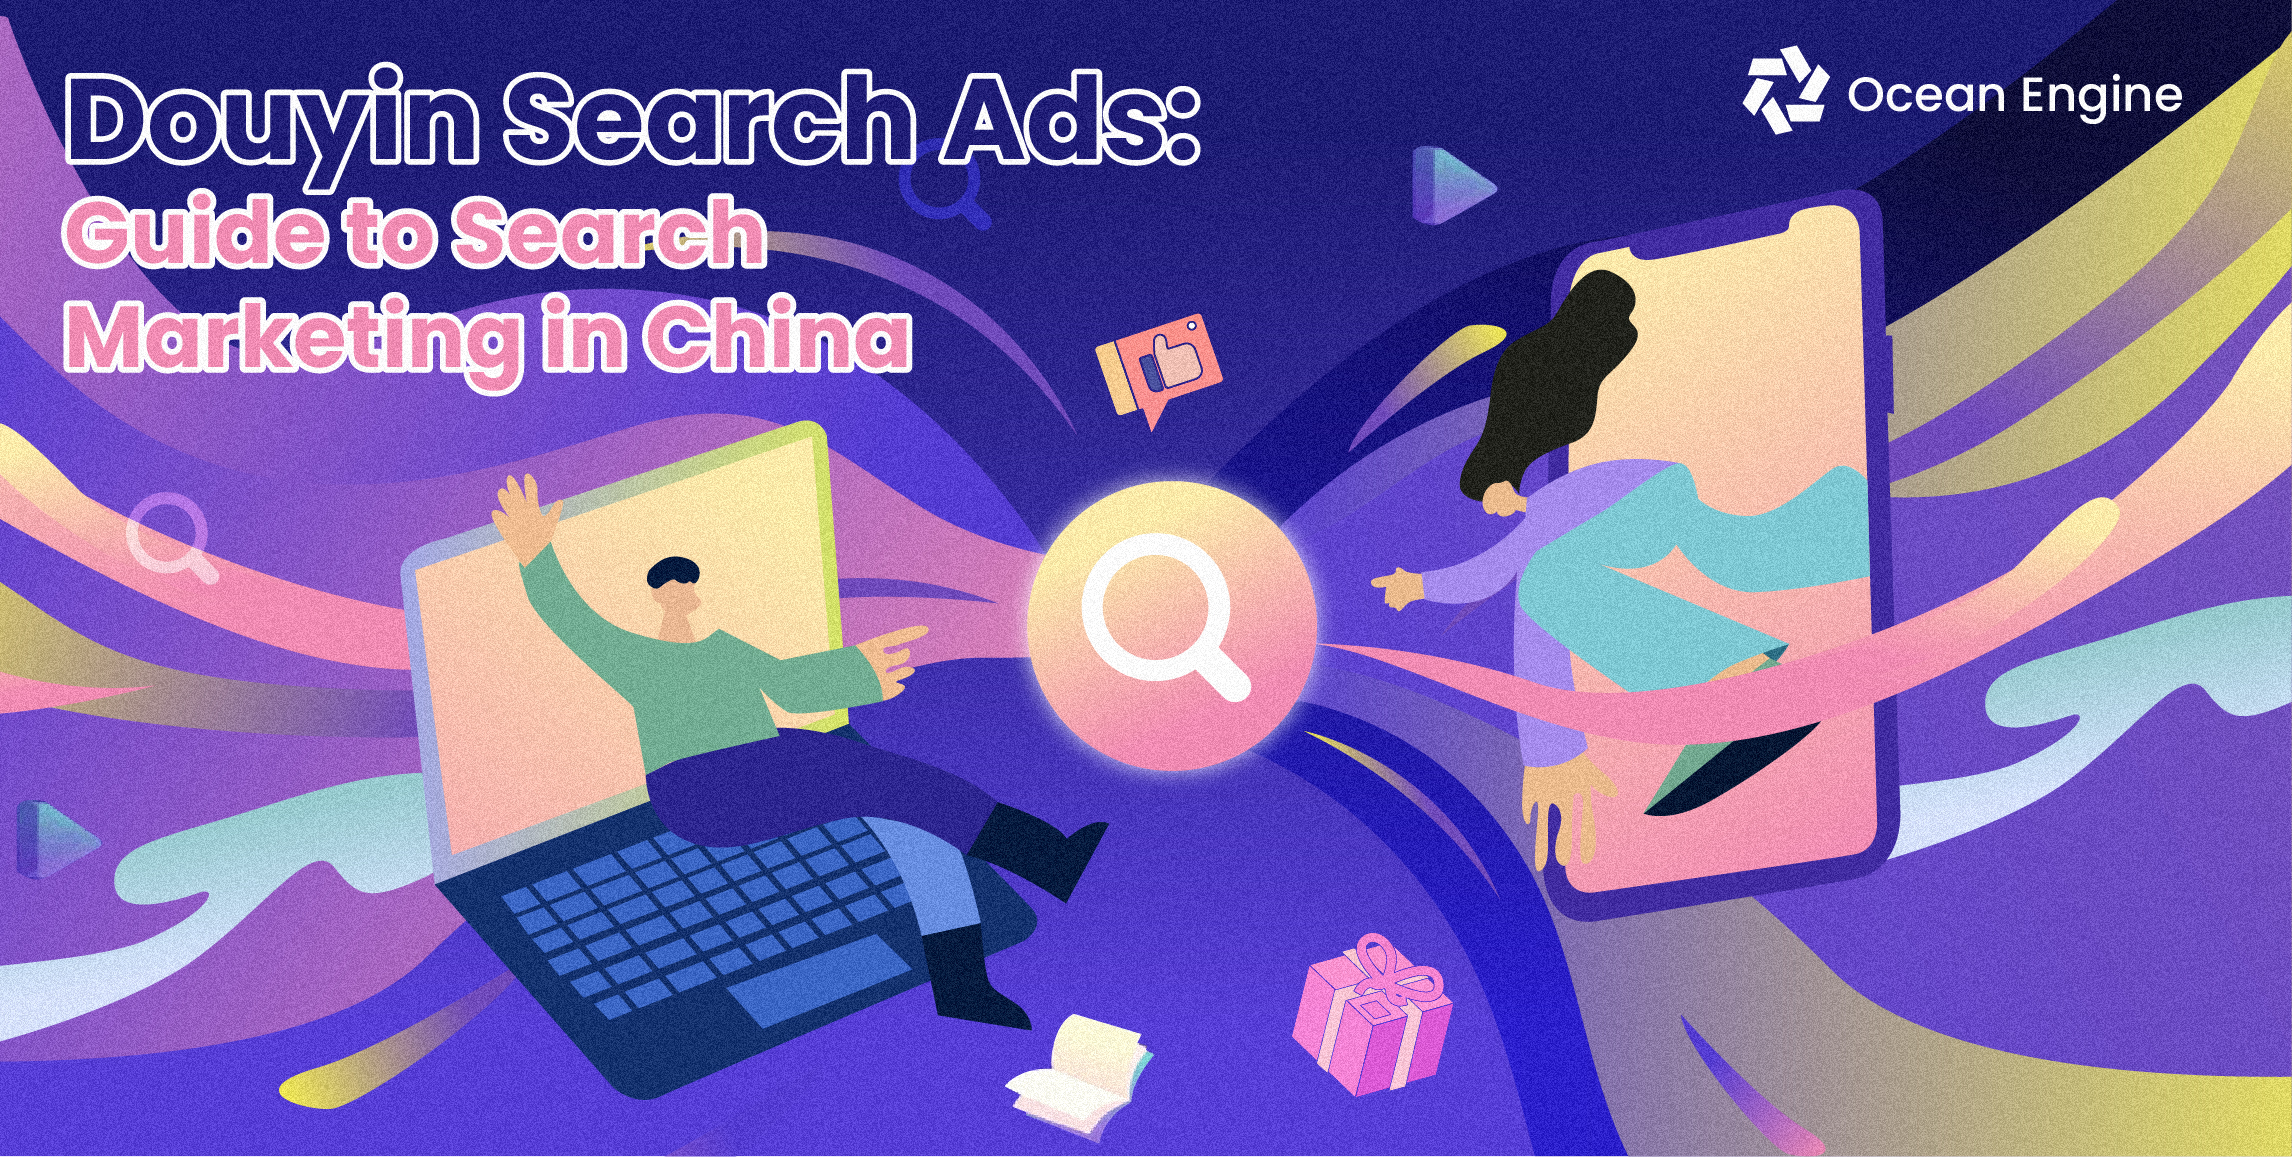 Douyin Search Ads: China’s Hottest Social and Video Search Engine